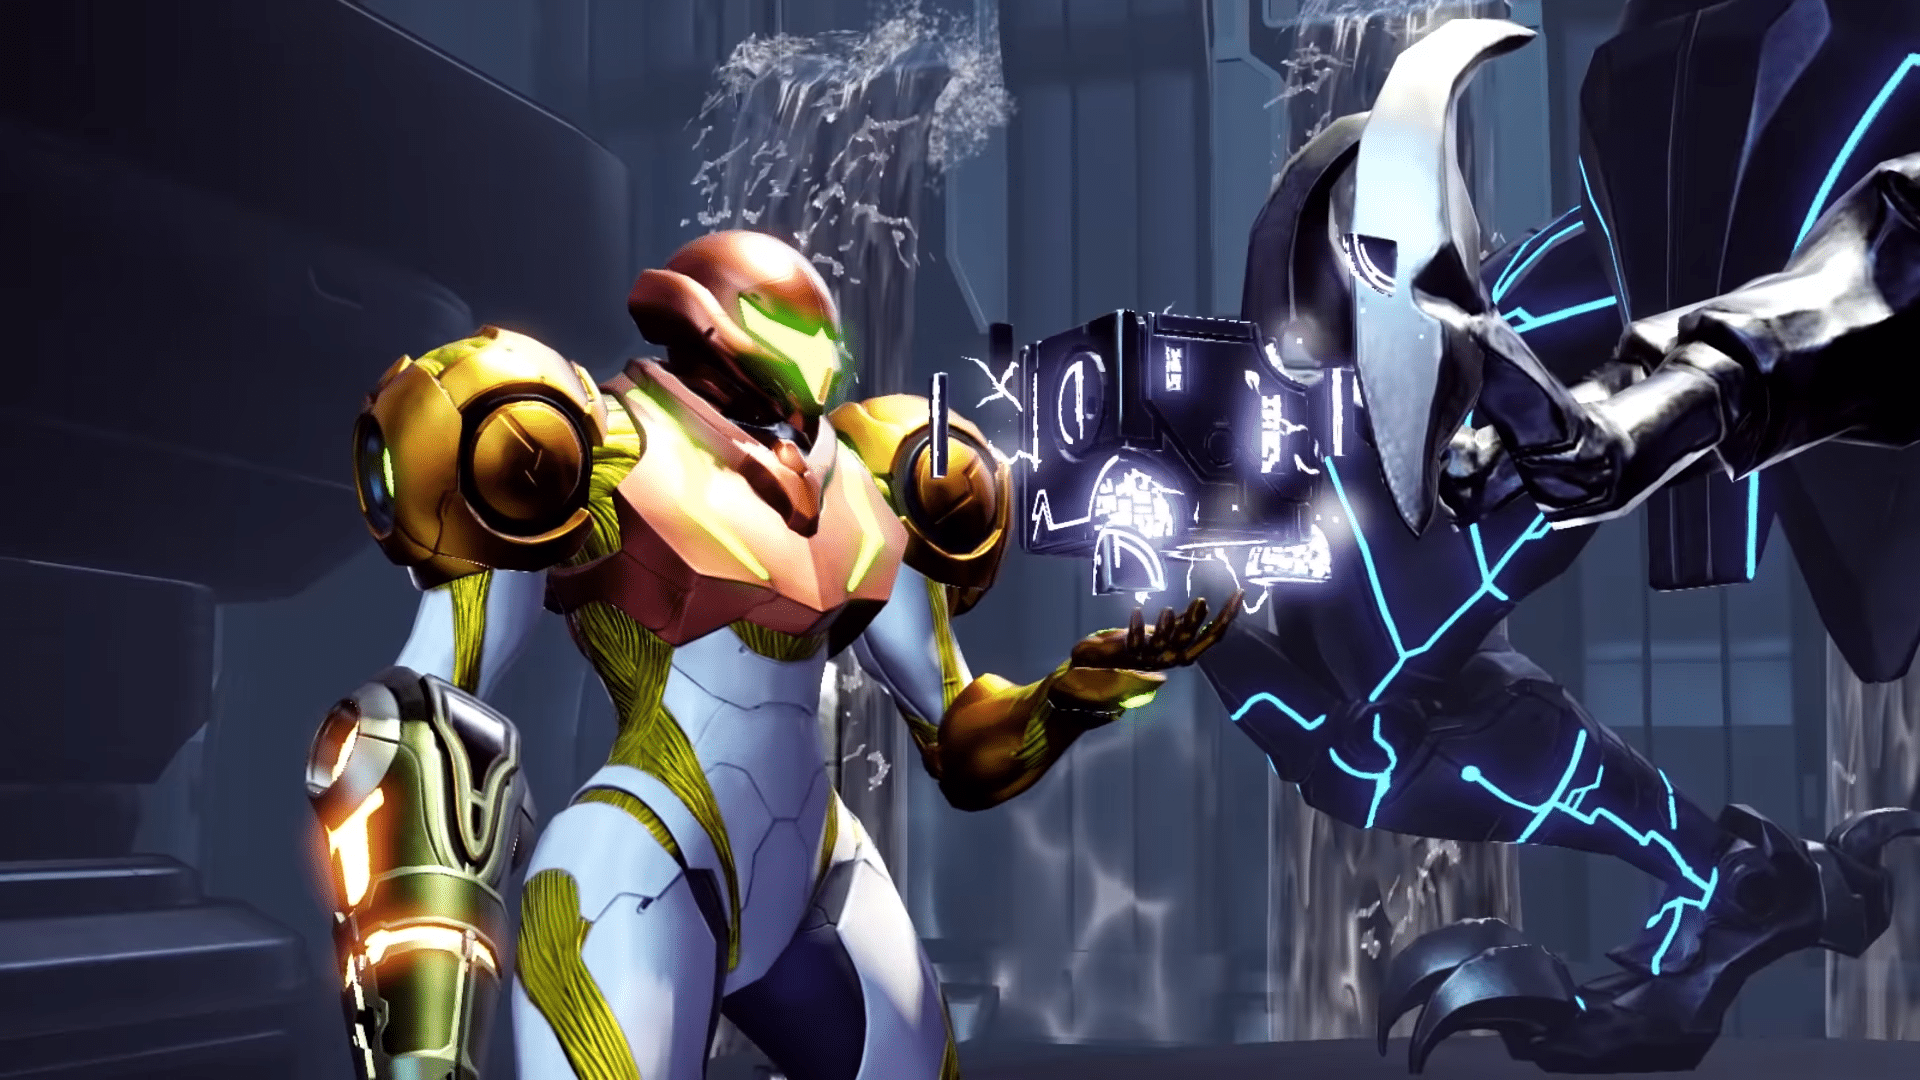 New Metroid Dread Teaser States the Importance of Trusting Your Instincts